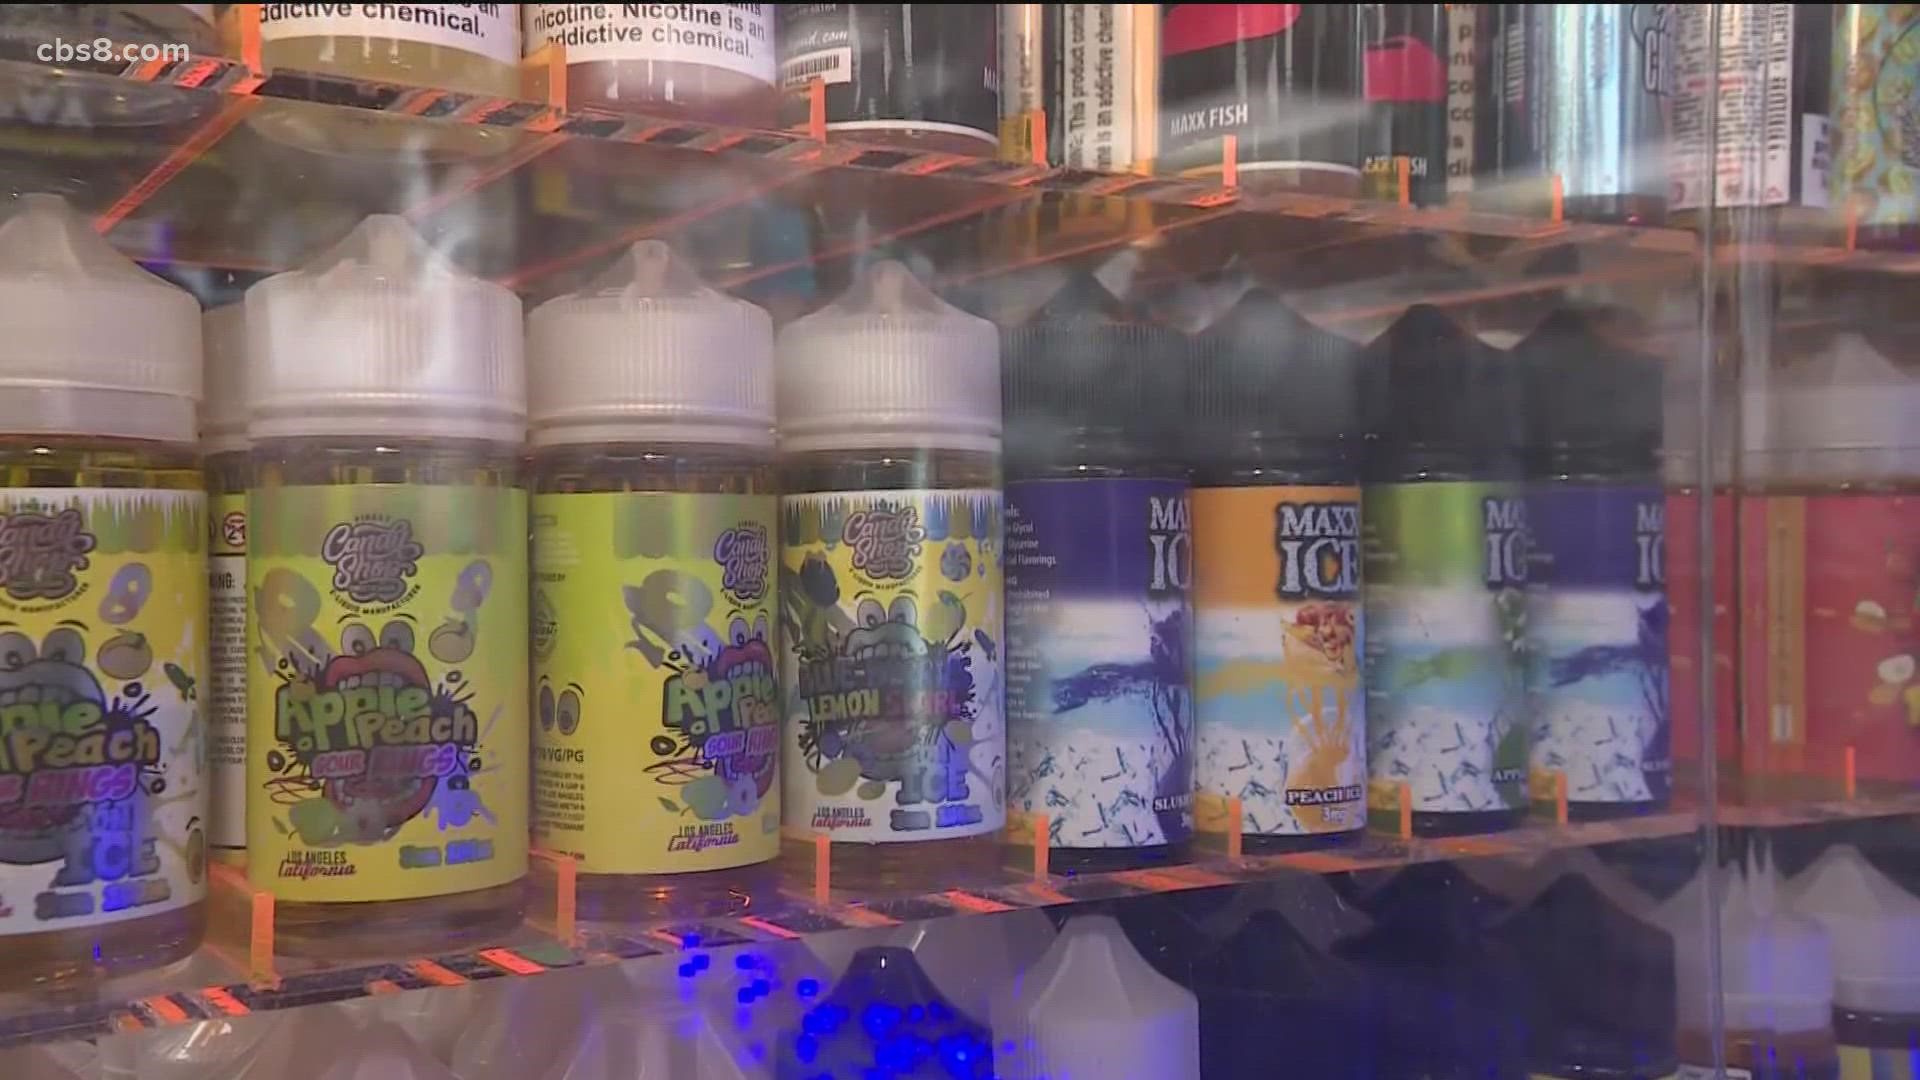 President of the California State PTA, Carol Green joined Morning Extra to talk about the risks of vaping and she gives tips for parents to talk to their kids about